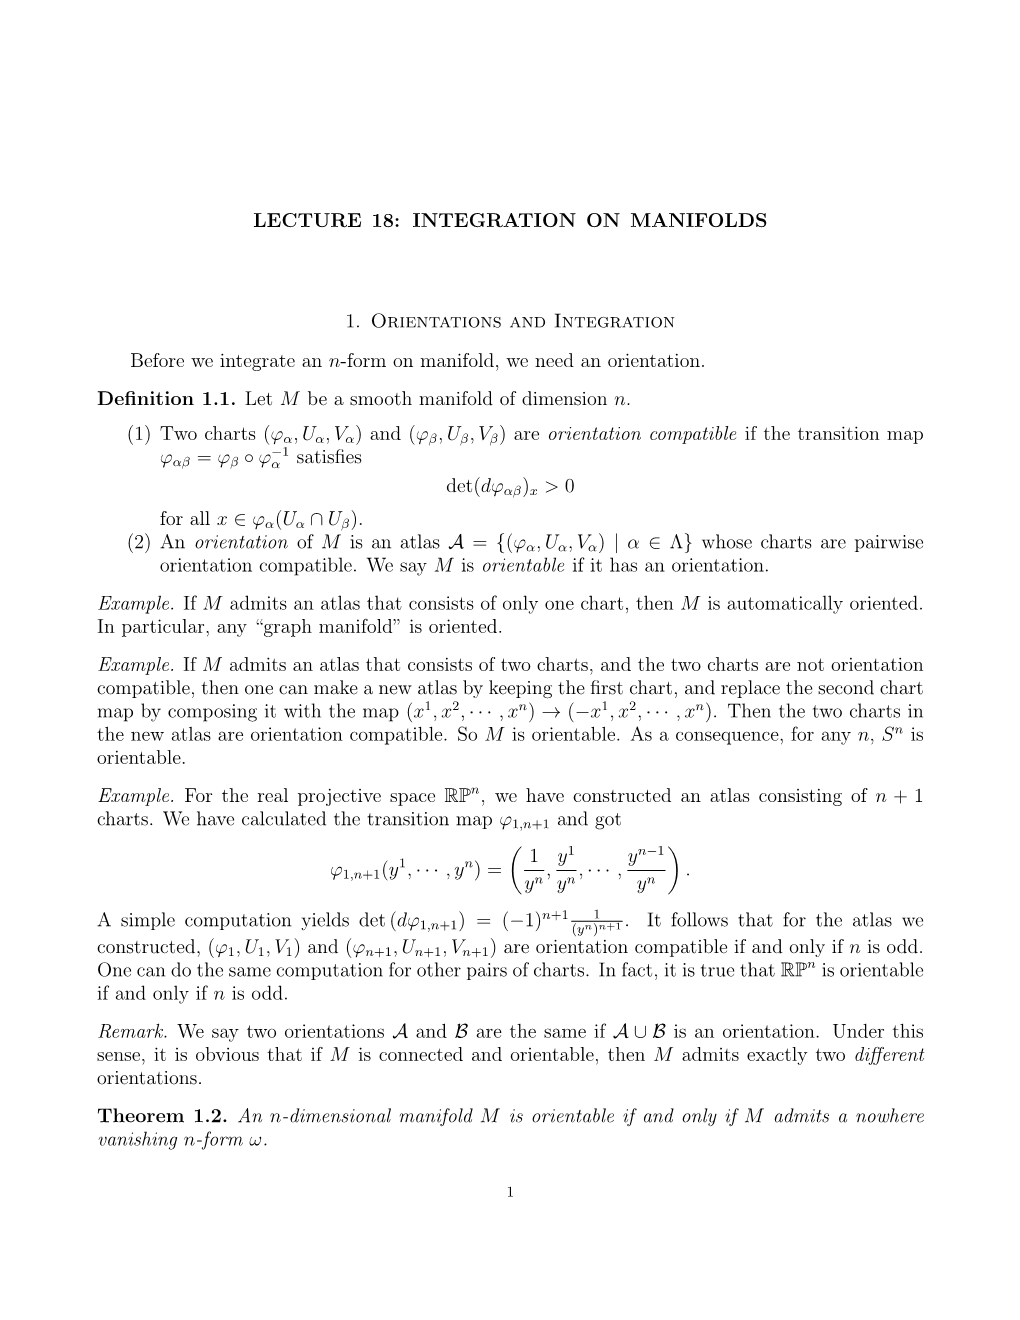 LECTURE 18: INTEGRATION on MANIFOLDS 1. Orientations And